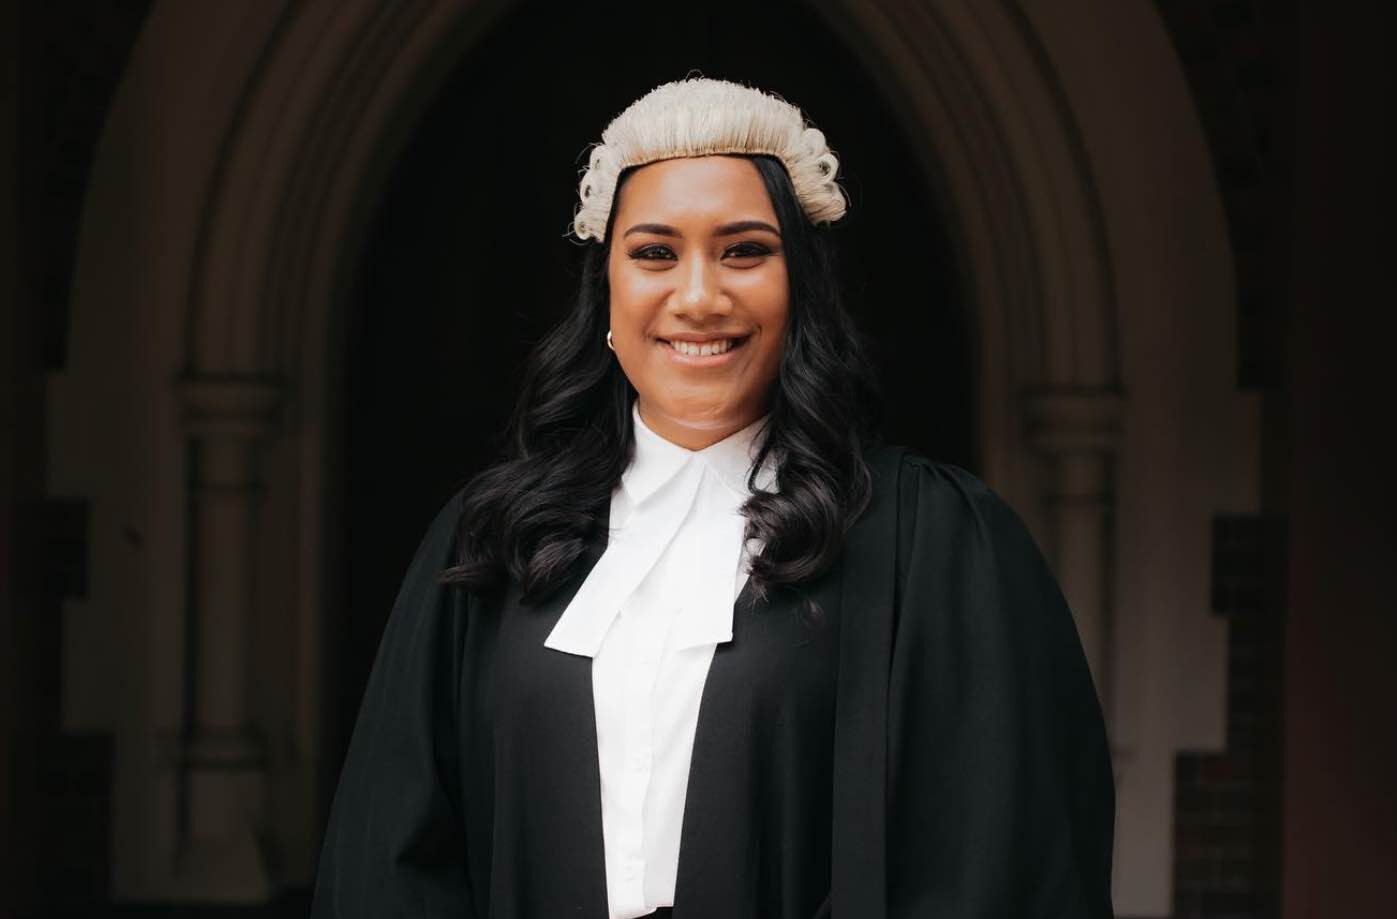 Tuluvao Futi admitted as a Barrister and Solicitor of the High Court of NZ